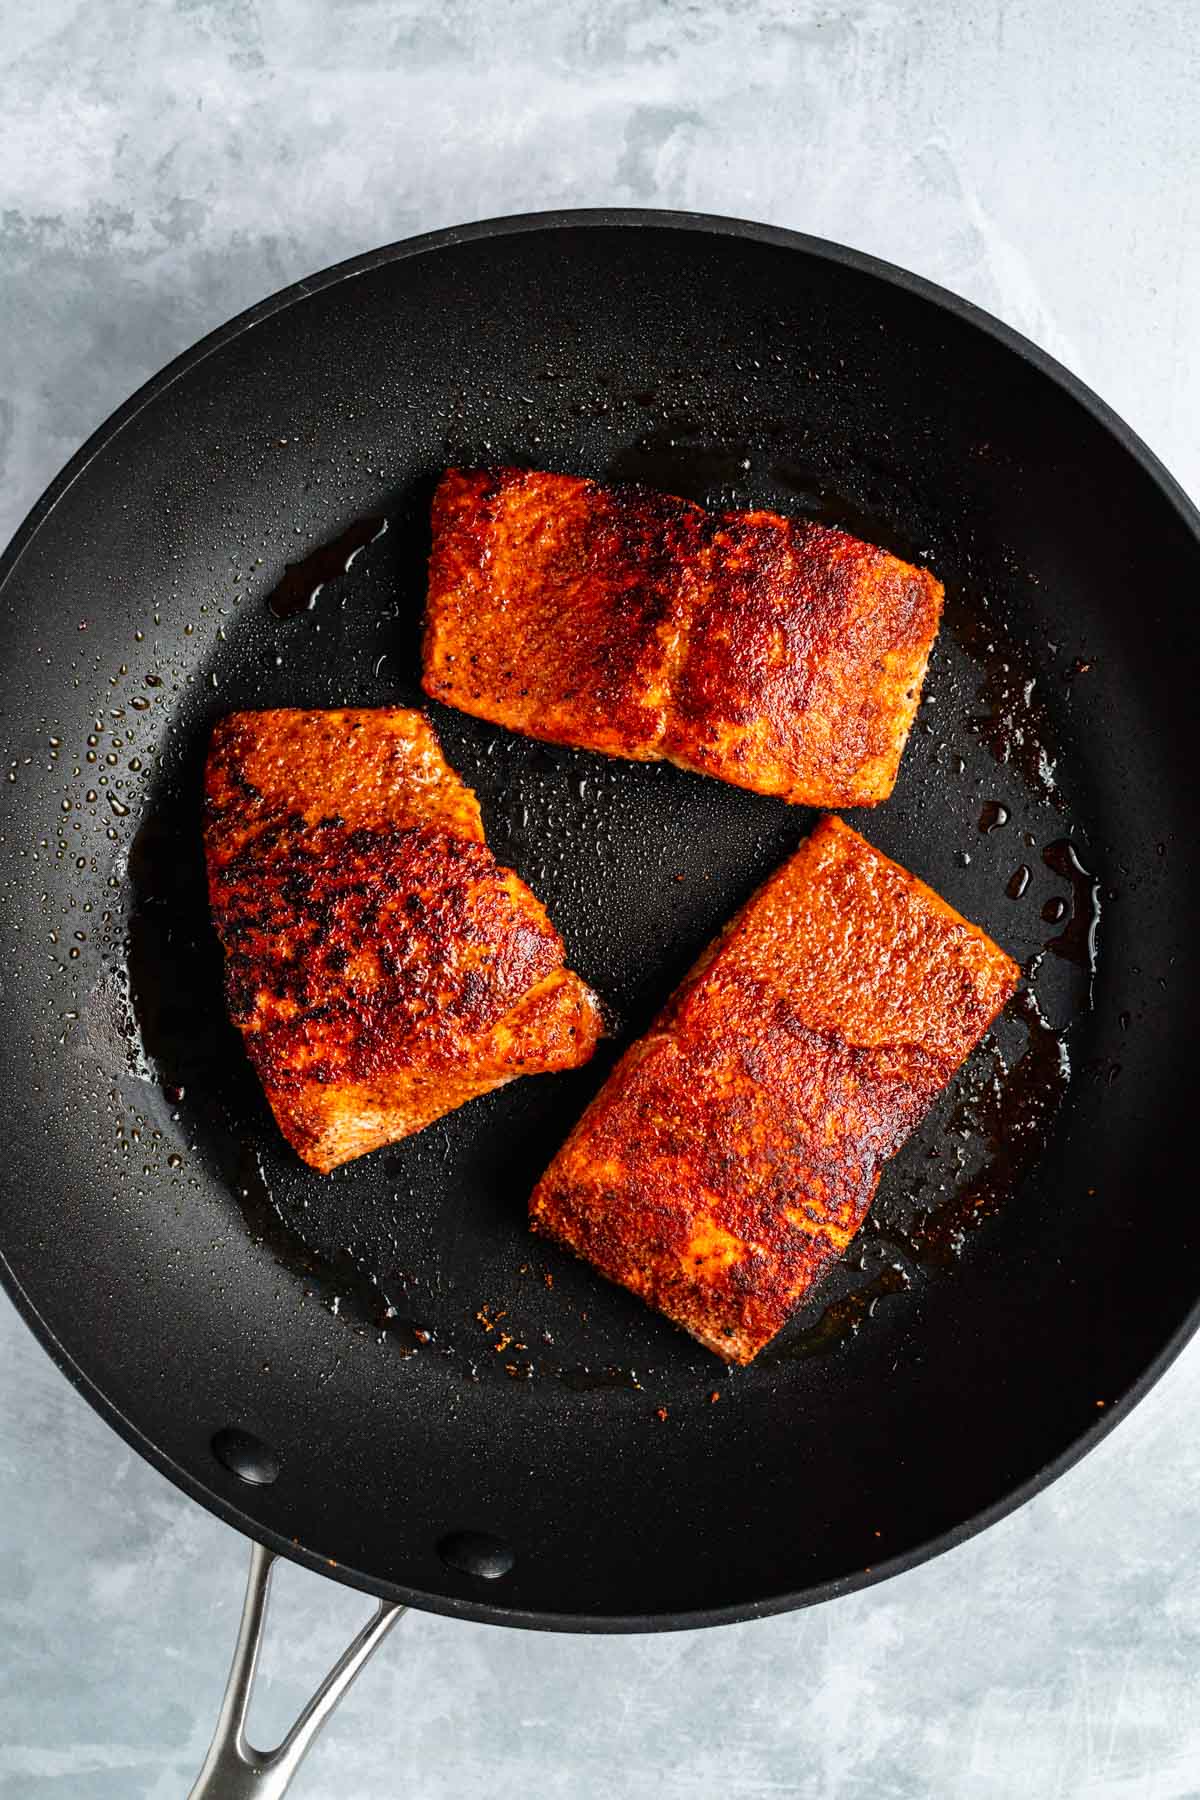 Salmon fillets cooking in a large skillet.